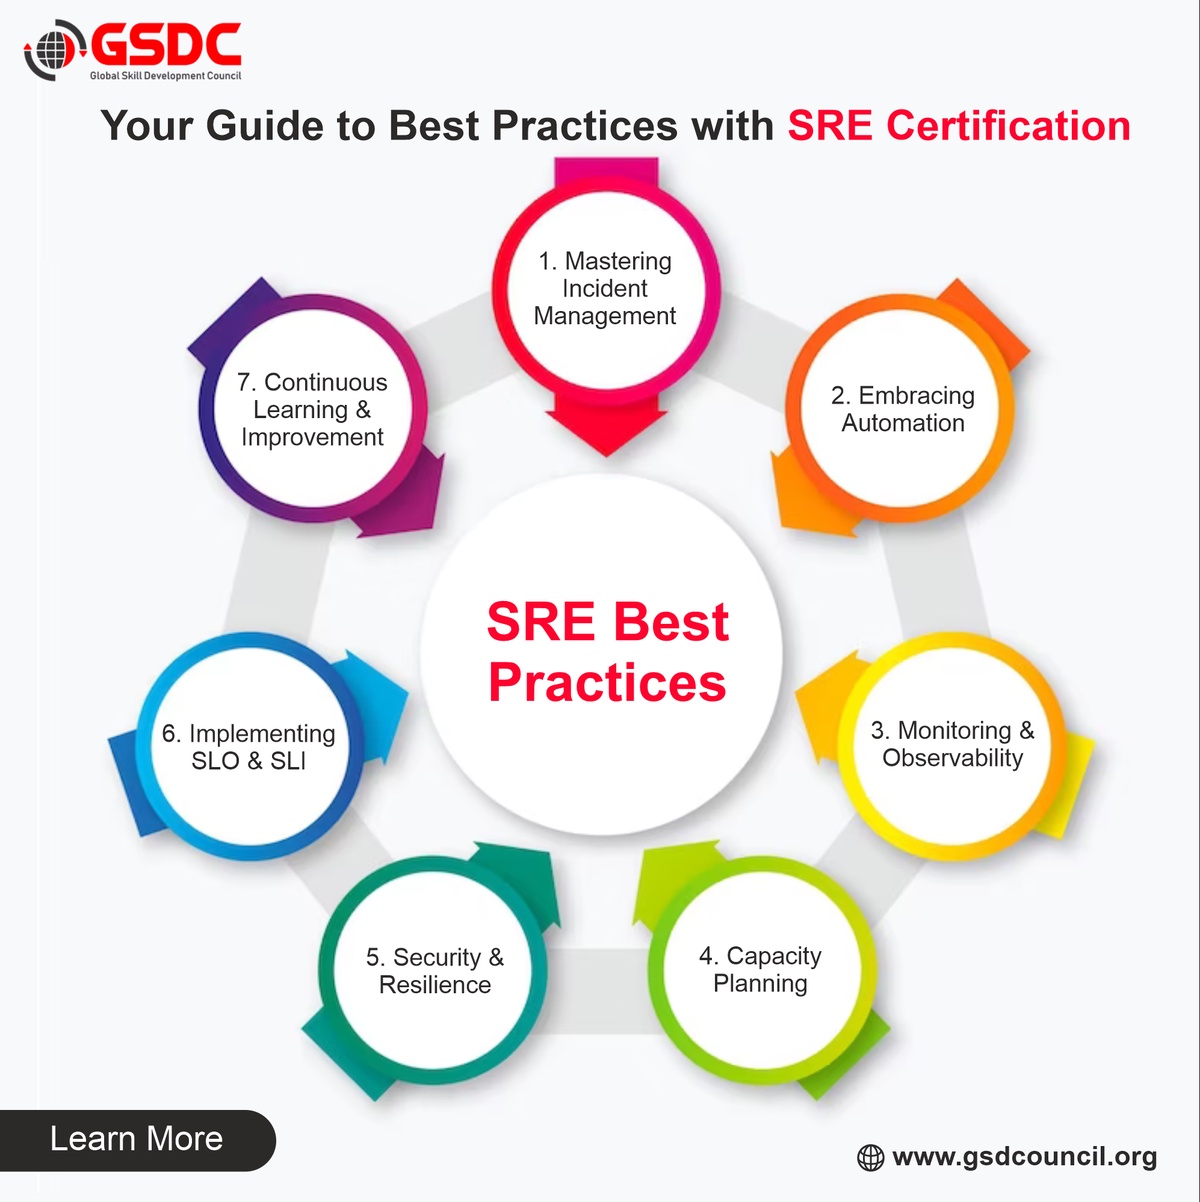 Your Guide to Best Practices With SRE Foundation Certification